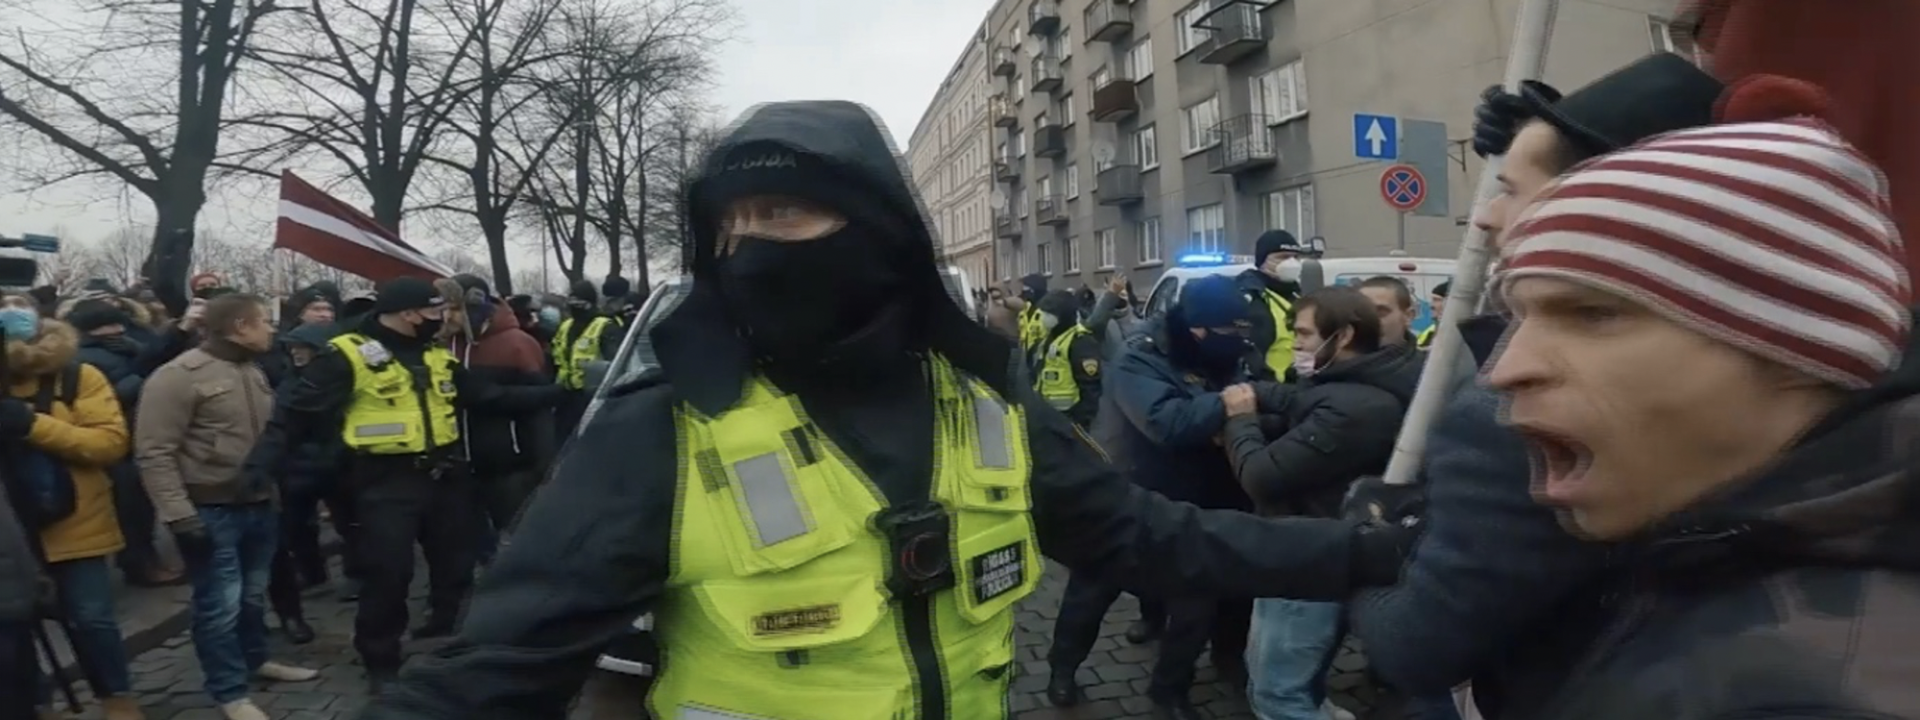 Protesters argue with police during the protest on December 12, 2020 in Riga.